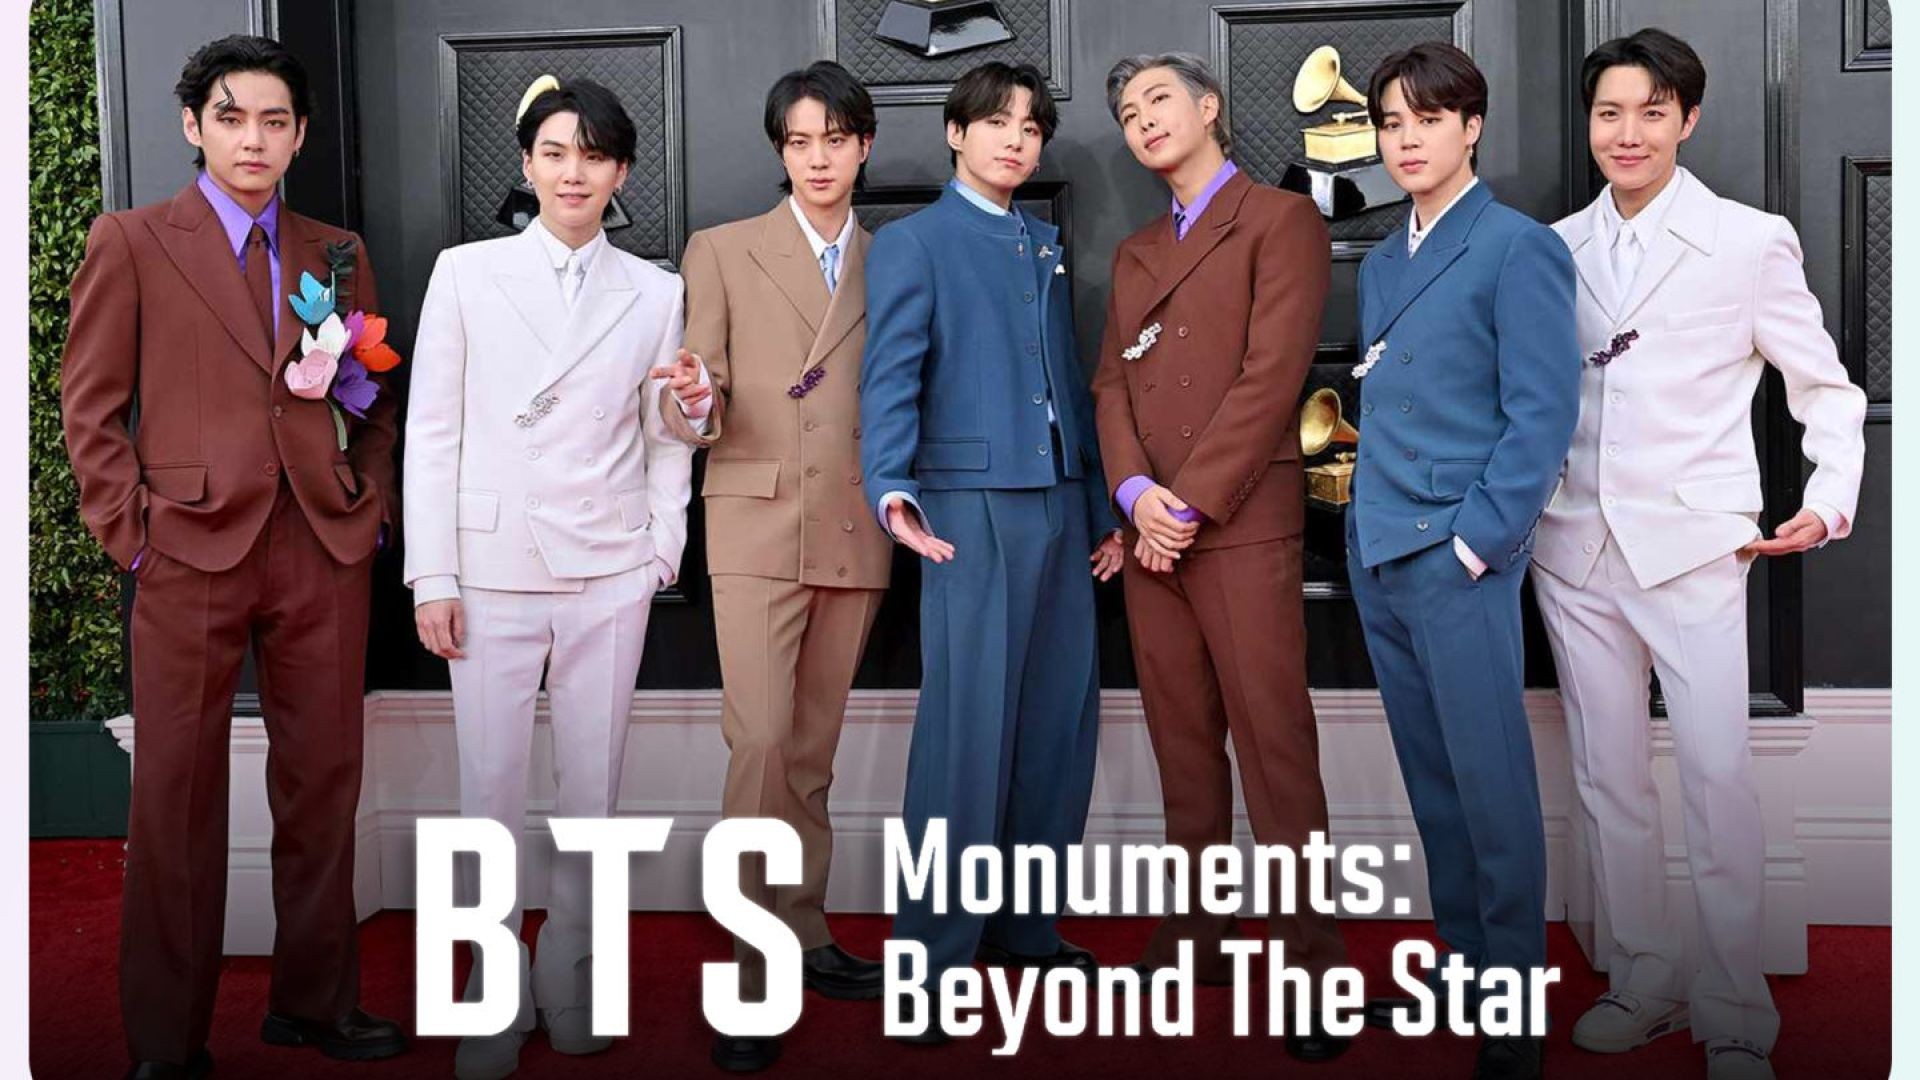 ep  4 - Disconnected - BTS Monuments: Beyond The Star